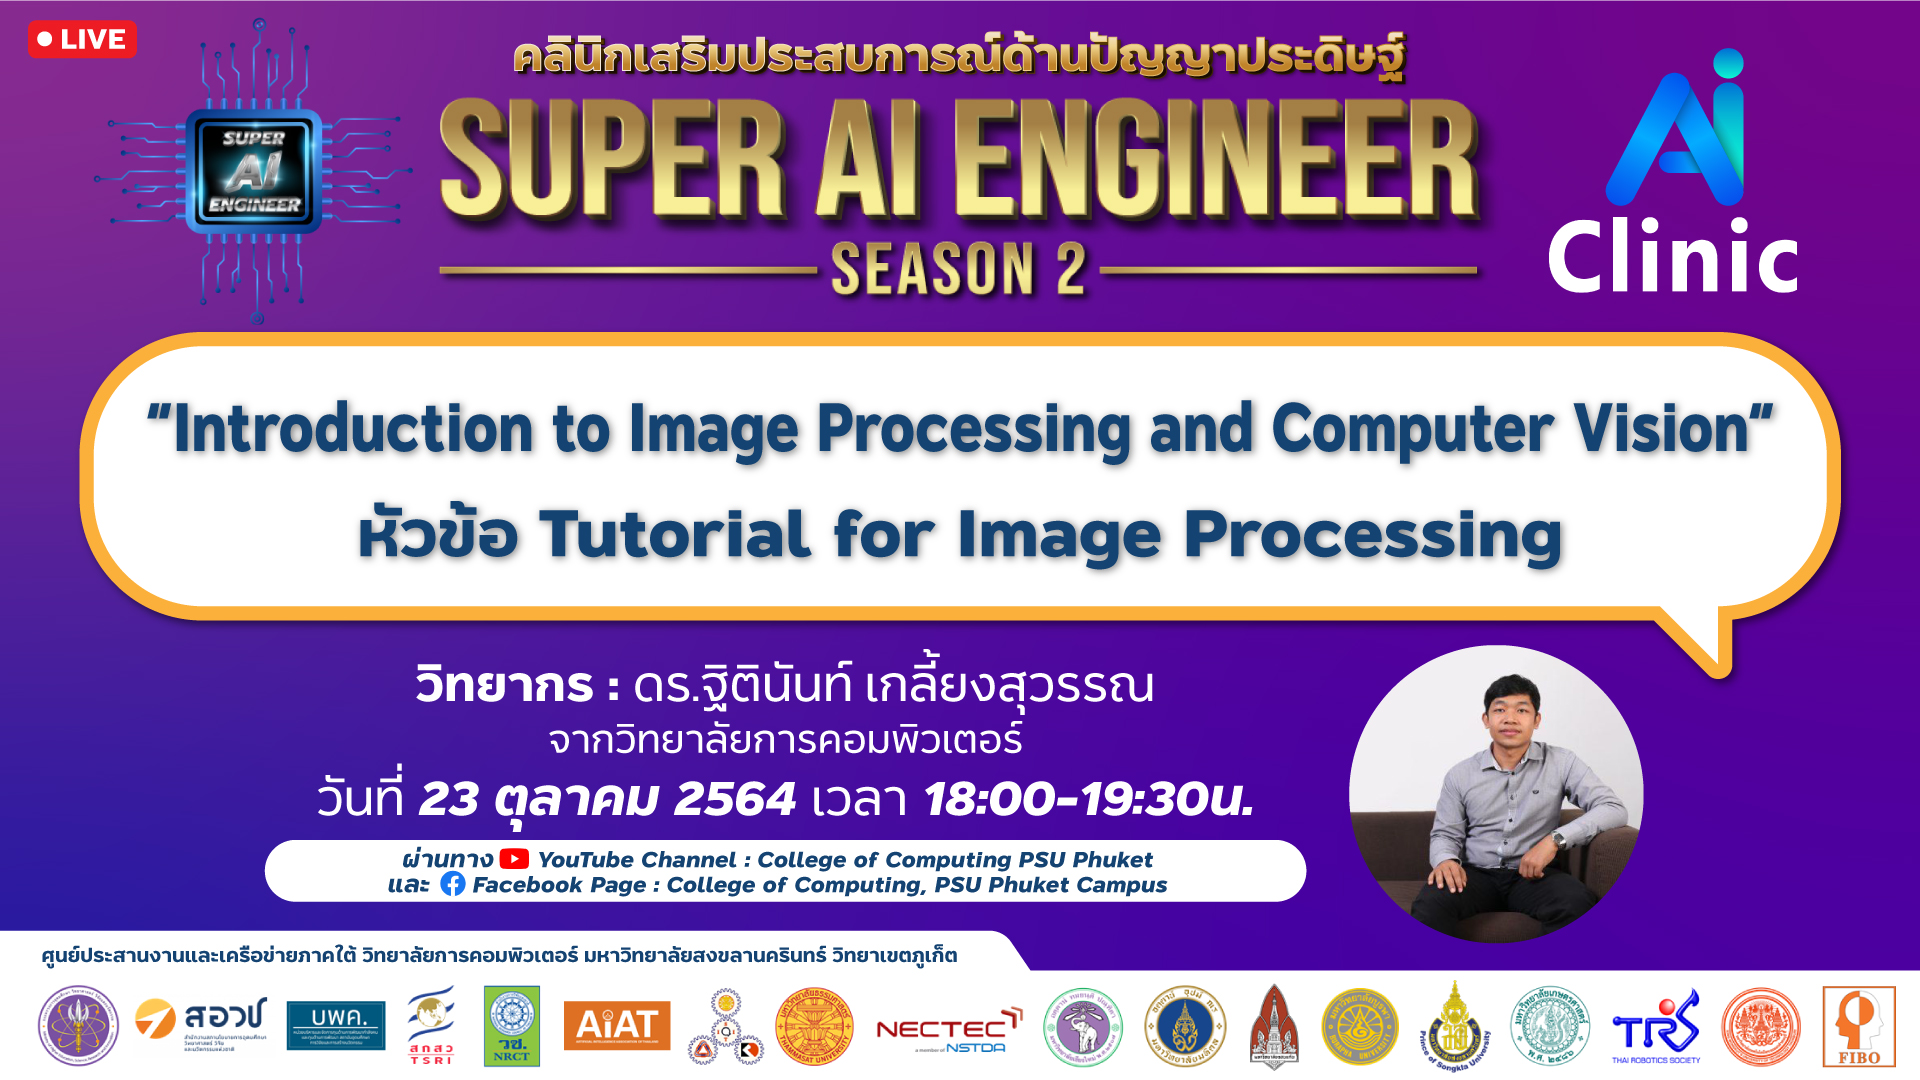 Tutorial for Image Processing